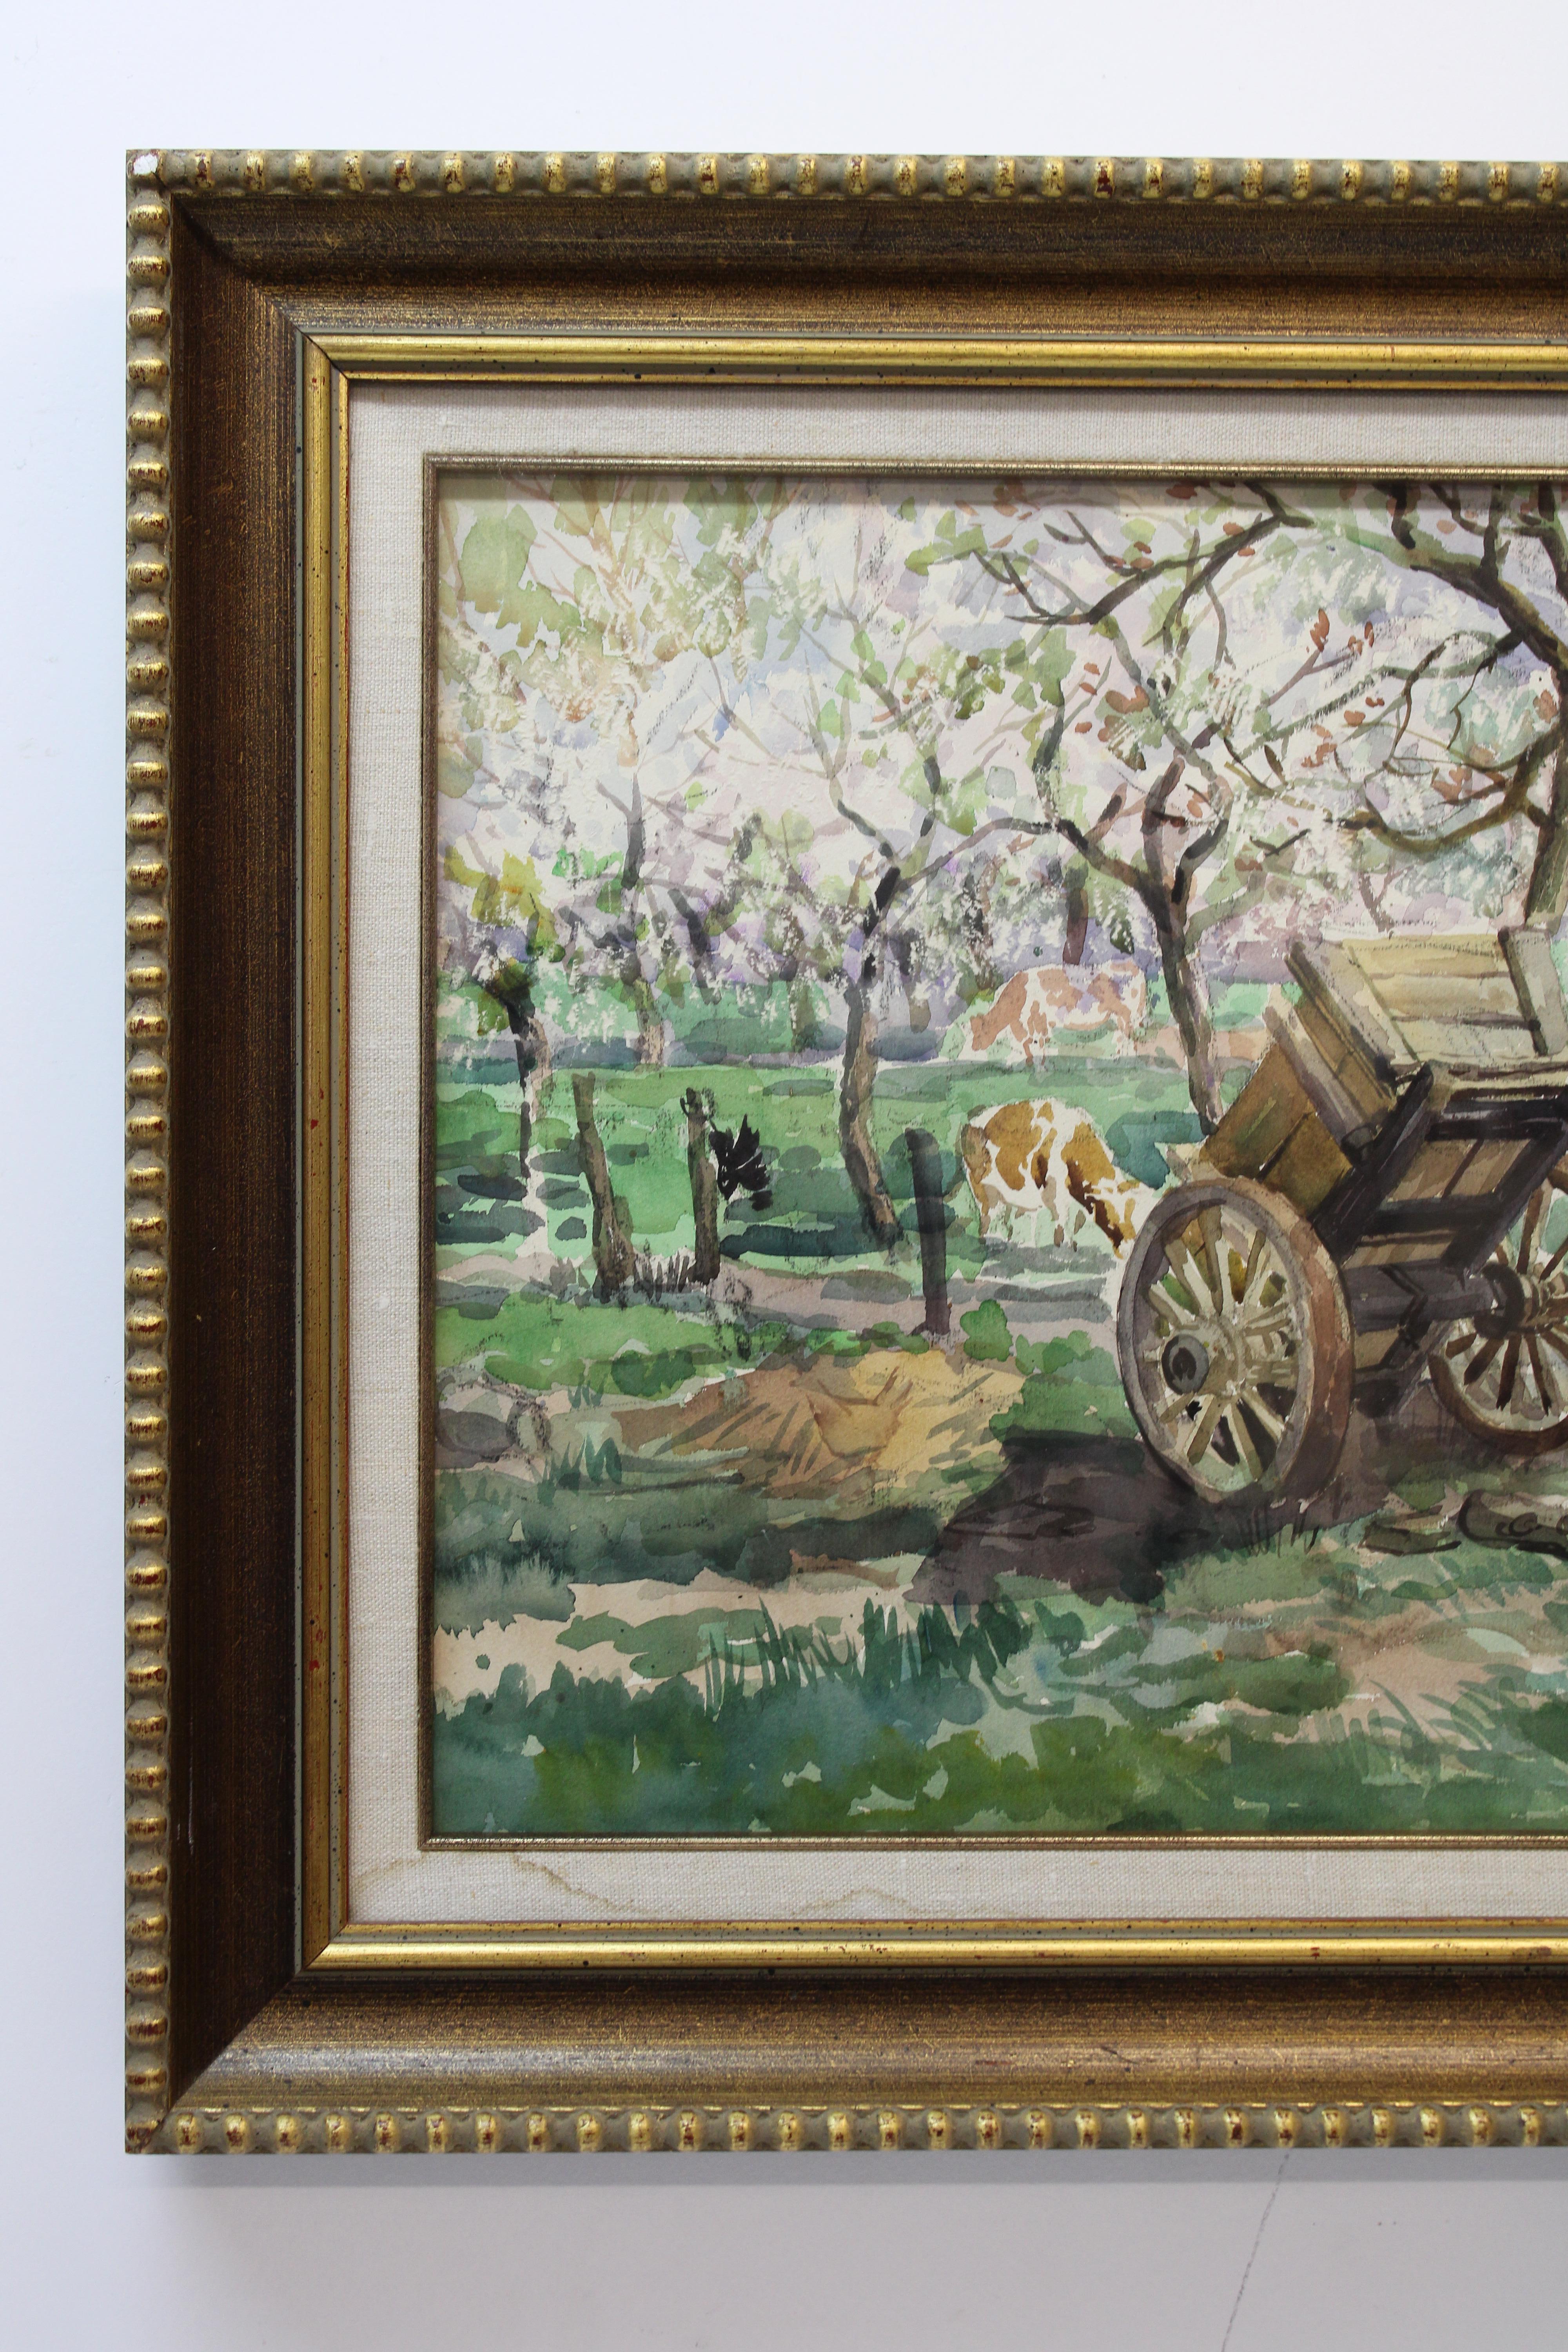 C. 20th Century

Adorable Watercolor of a Countryside Landscape w/ Wagon ( signed in lower right I can not make out )